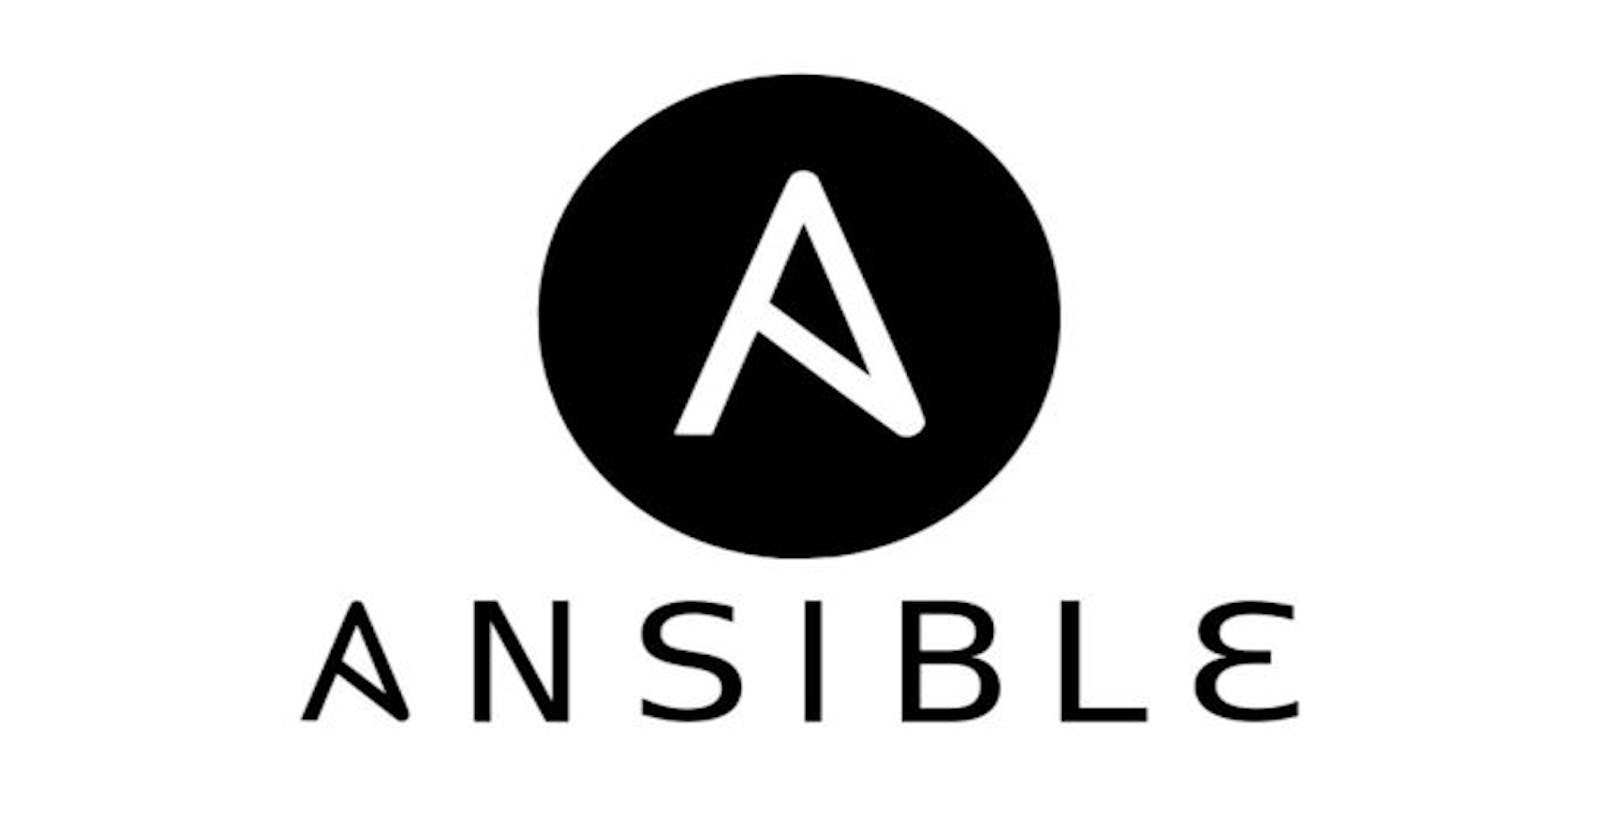 Deploy website into EC2 via ansible playbook as a production server